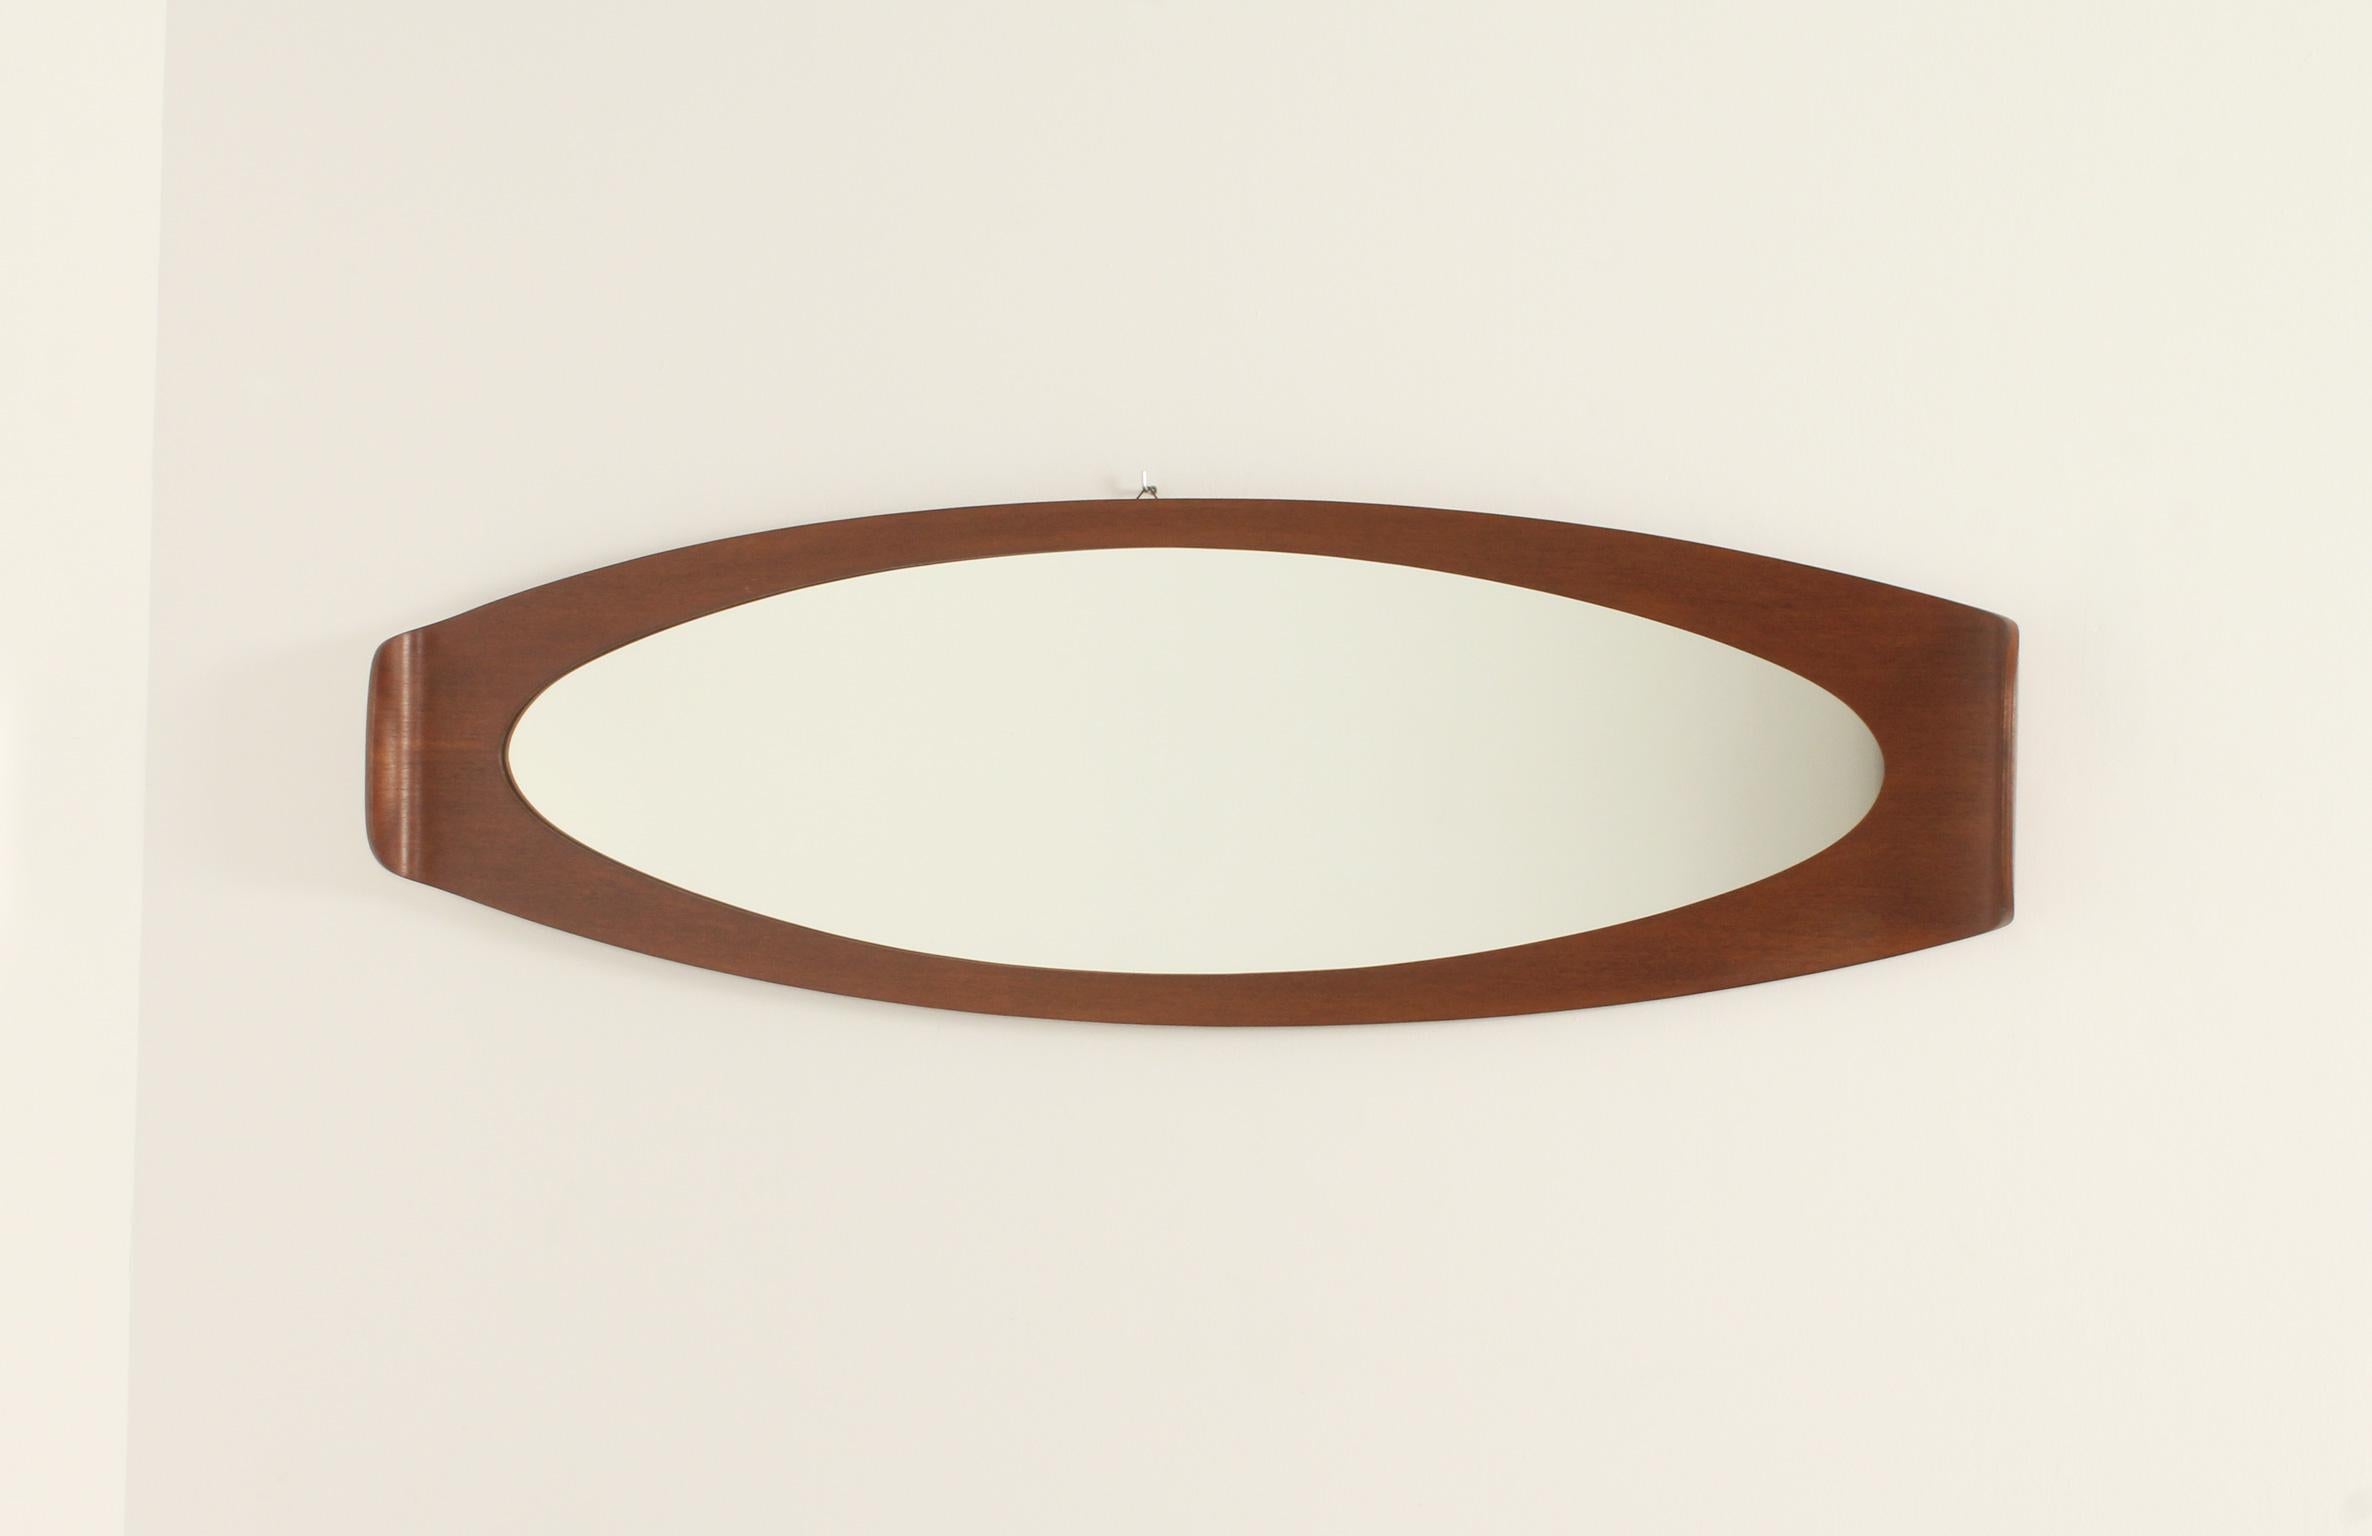 Large Campo & Graffi Wall Mirror for Home, Italy, 1950's For Sale 1